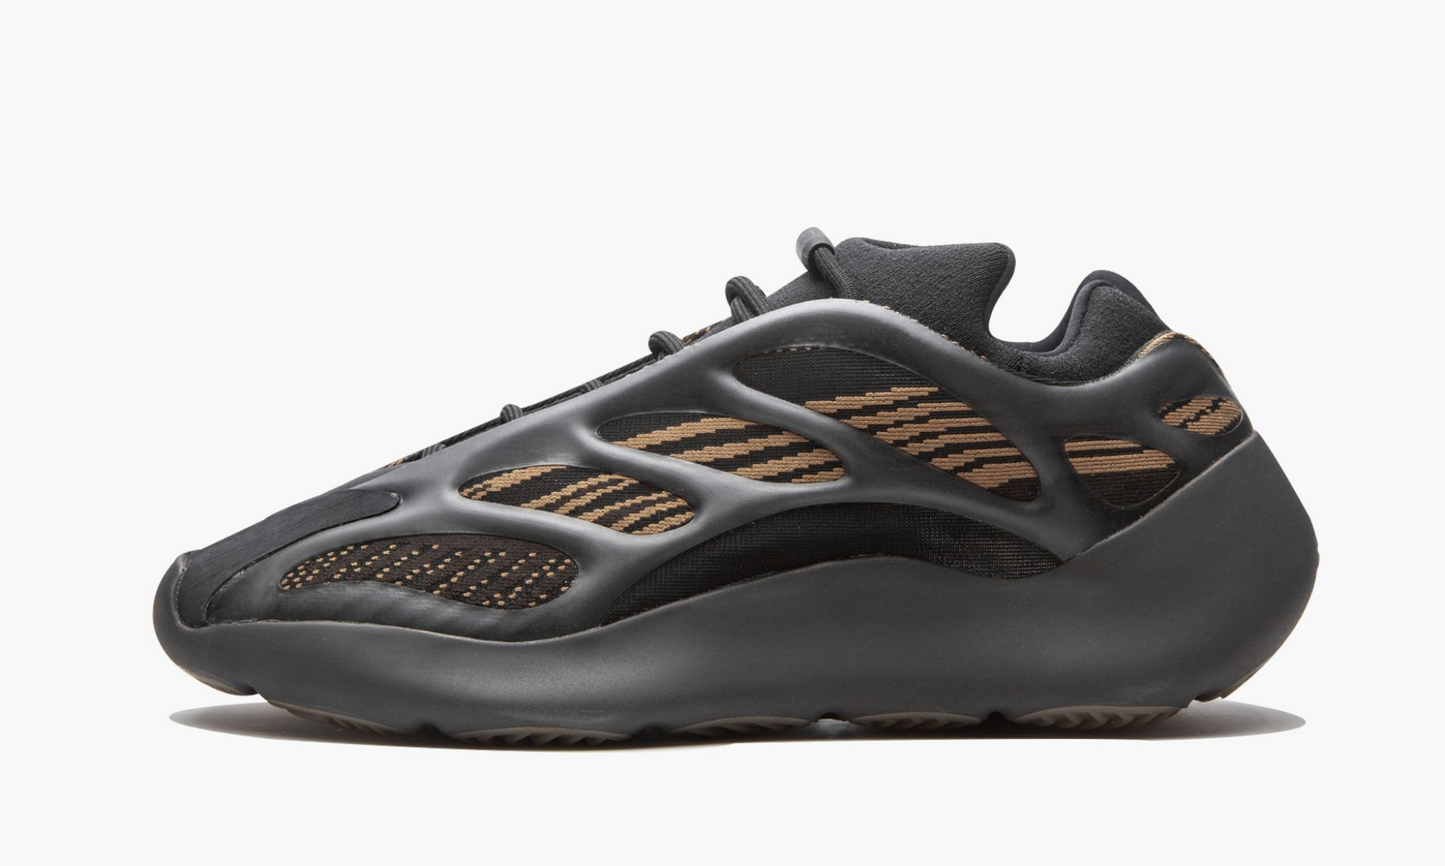 Yeezy 700 V3 "Clay Brown" - GY0189 | Grailshop